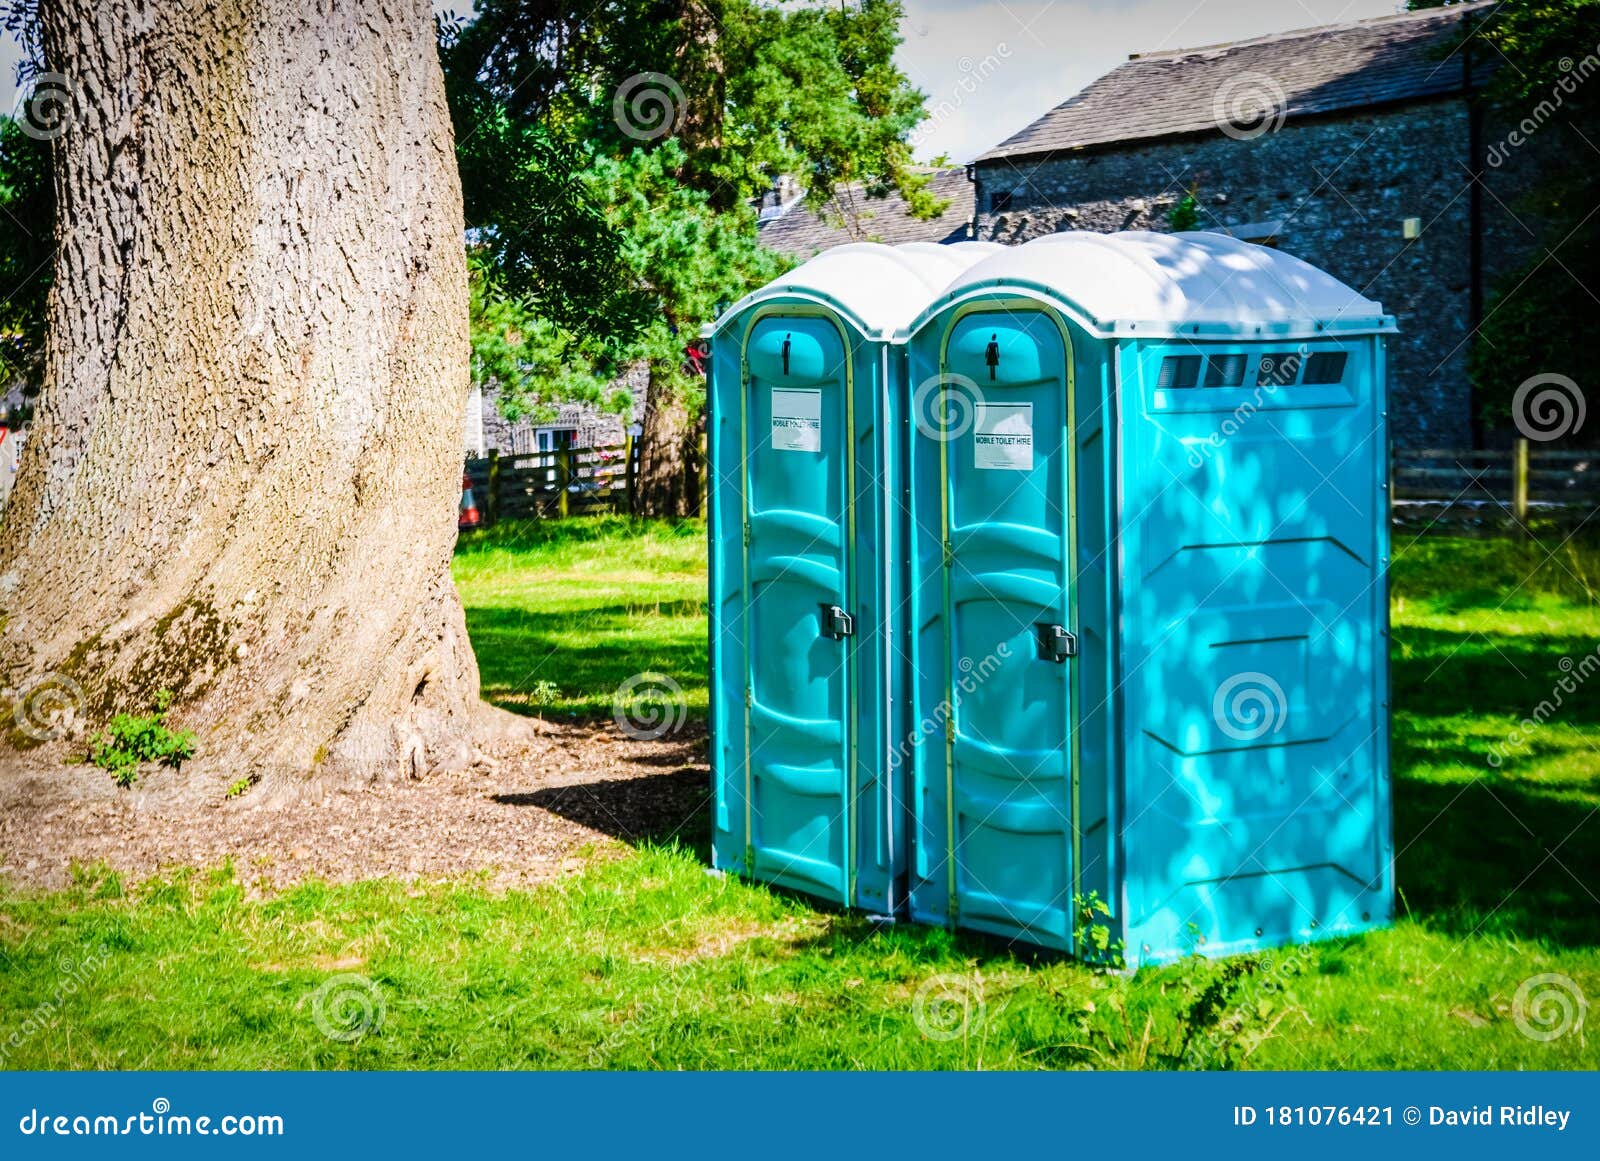 two blue - white portable toilet cabins at outside event uk